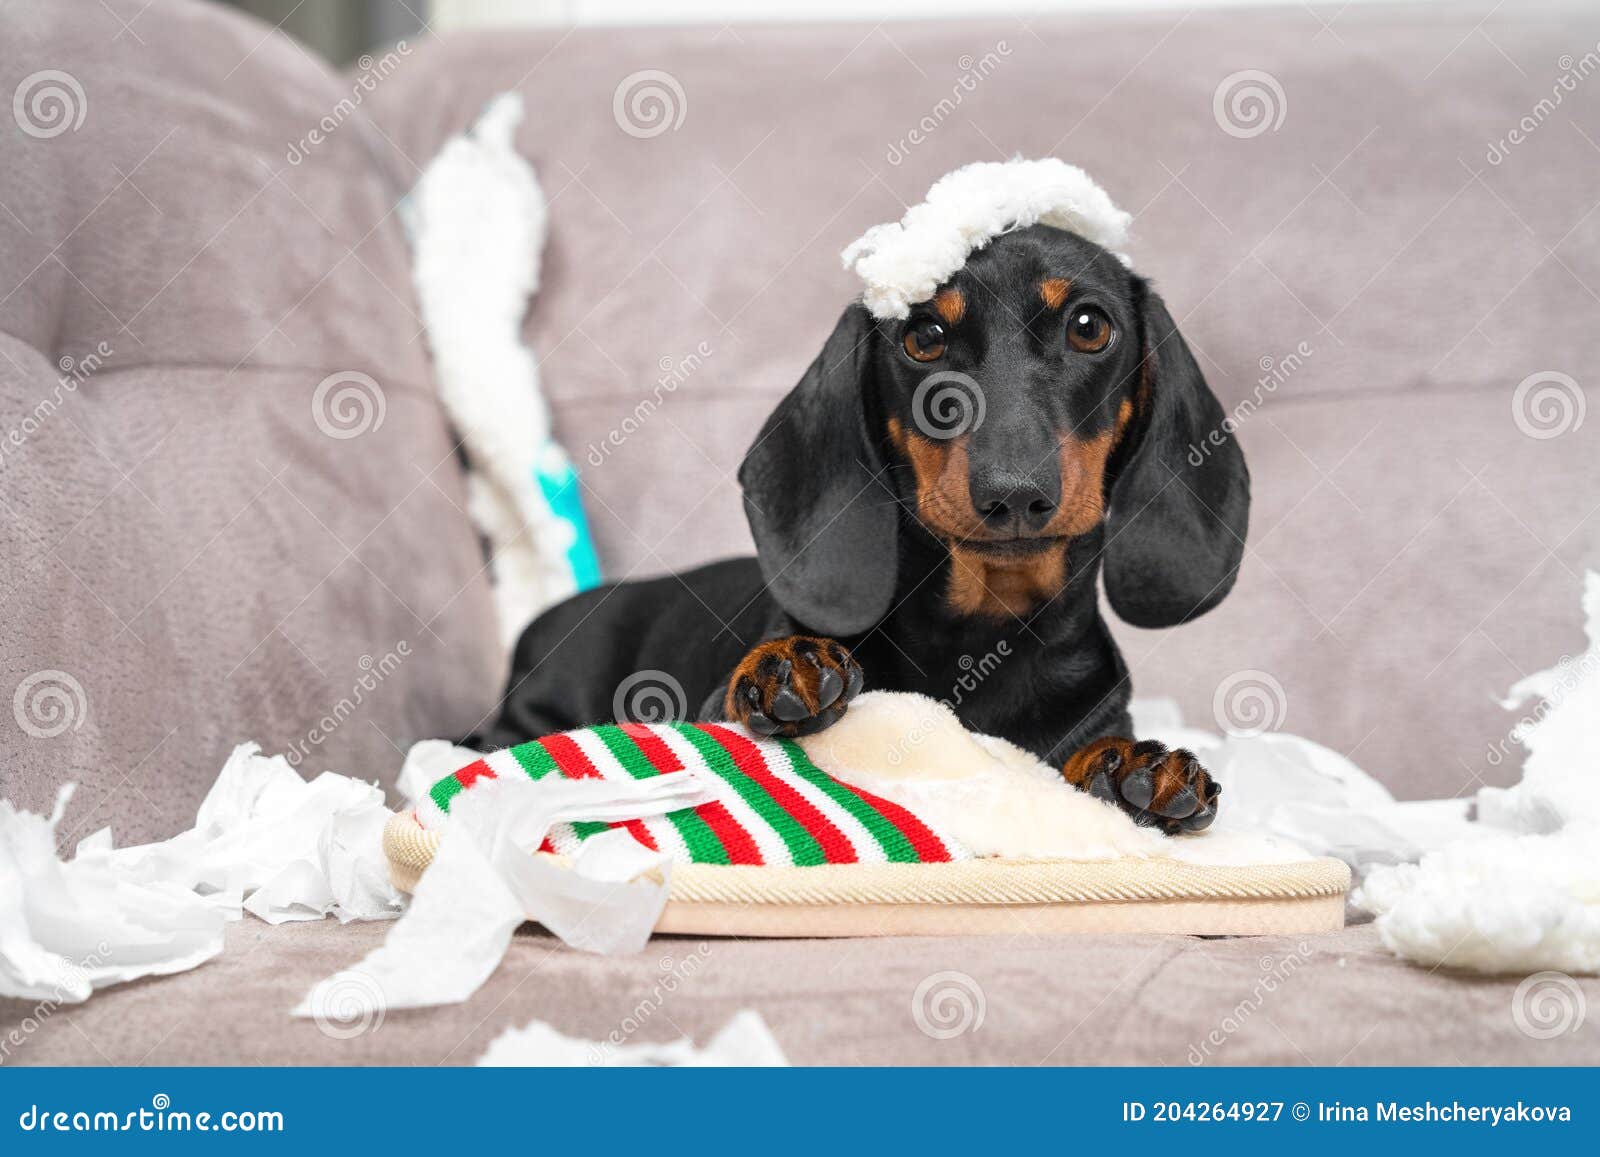 naughty dachshund puppy was left at home alone and started making a mess. pet tore up furniture and chews home slipper